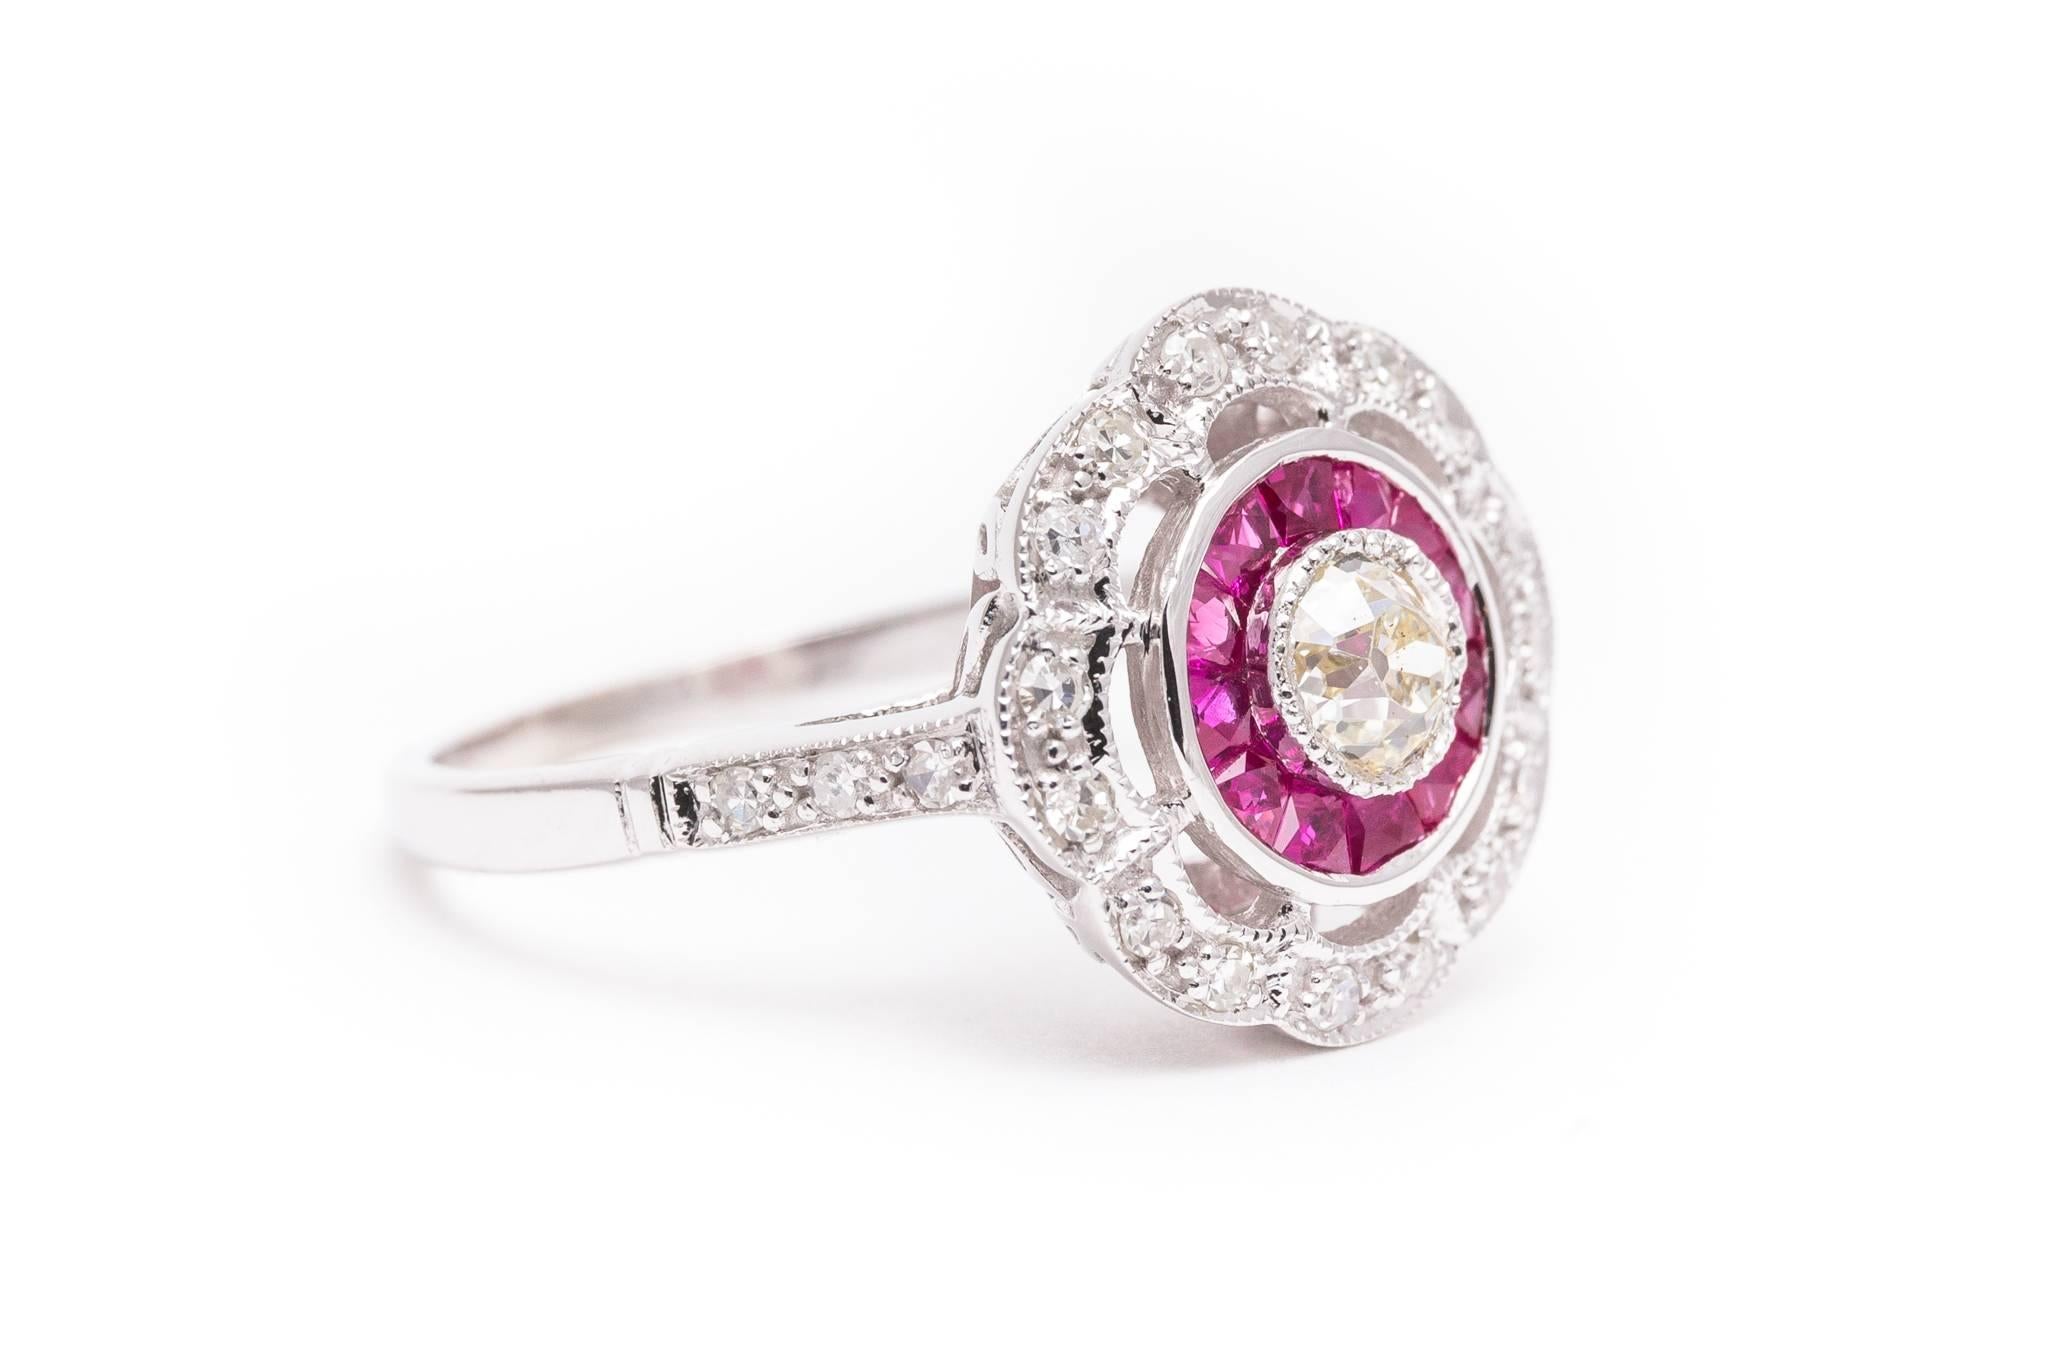 Beacon Hill Jewelers Presents:

A gorgeous target diamond and ruby ring in 14 karat white gold. Centered by an old European cut diamond set in a mille grained bezel, this ring features French cut rubies and diamonds encircling the center